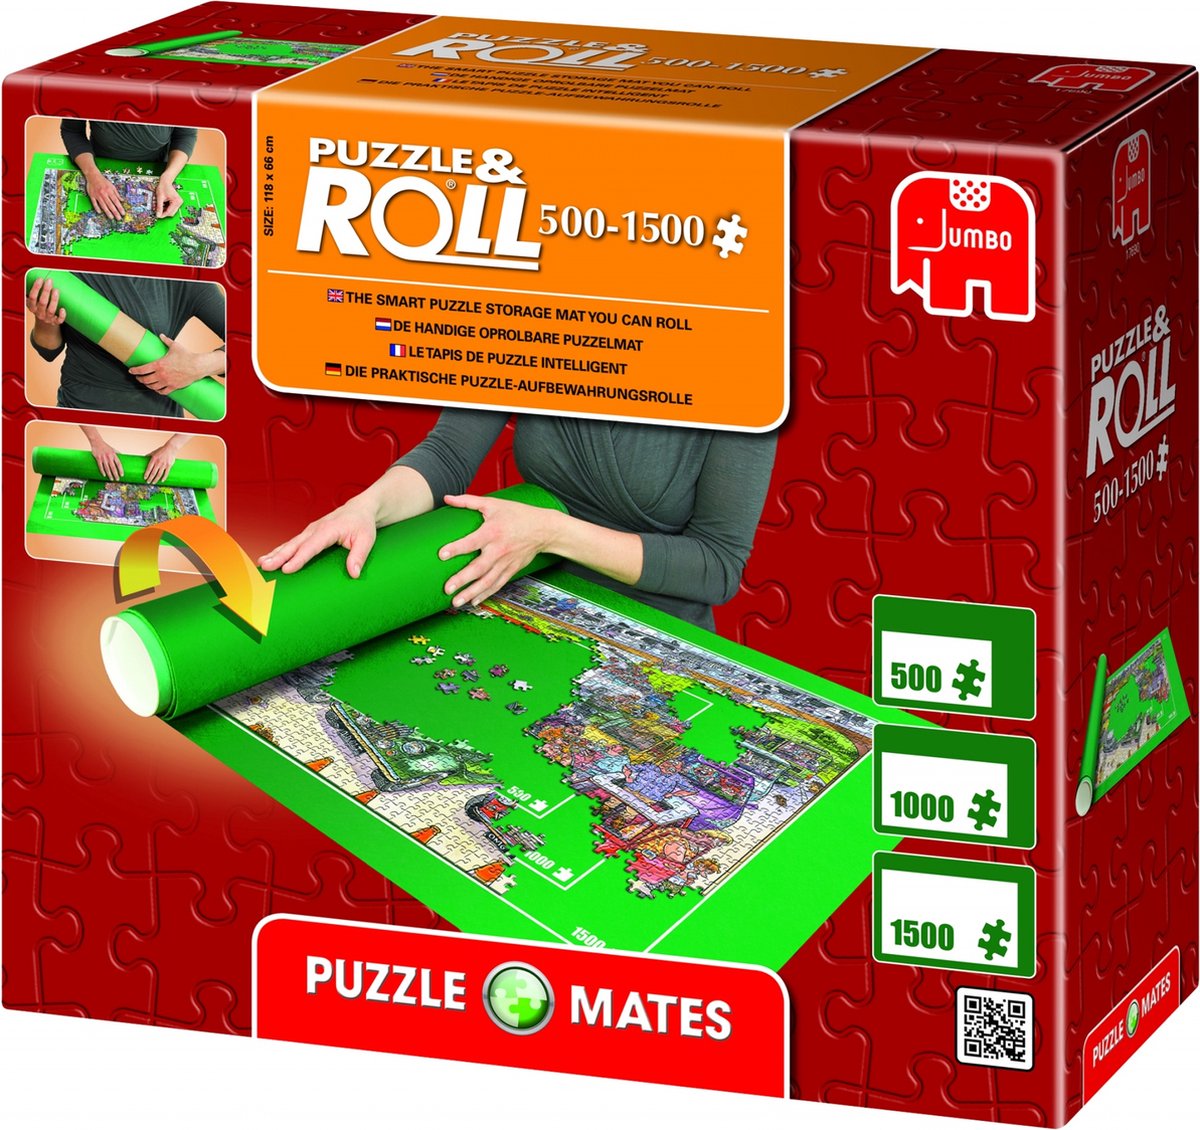 Jumbo Puzzle & Roll puzzelrol